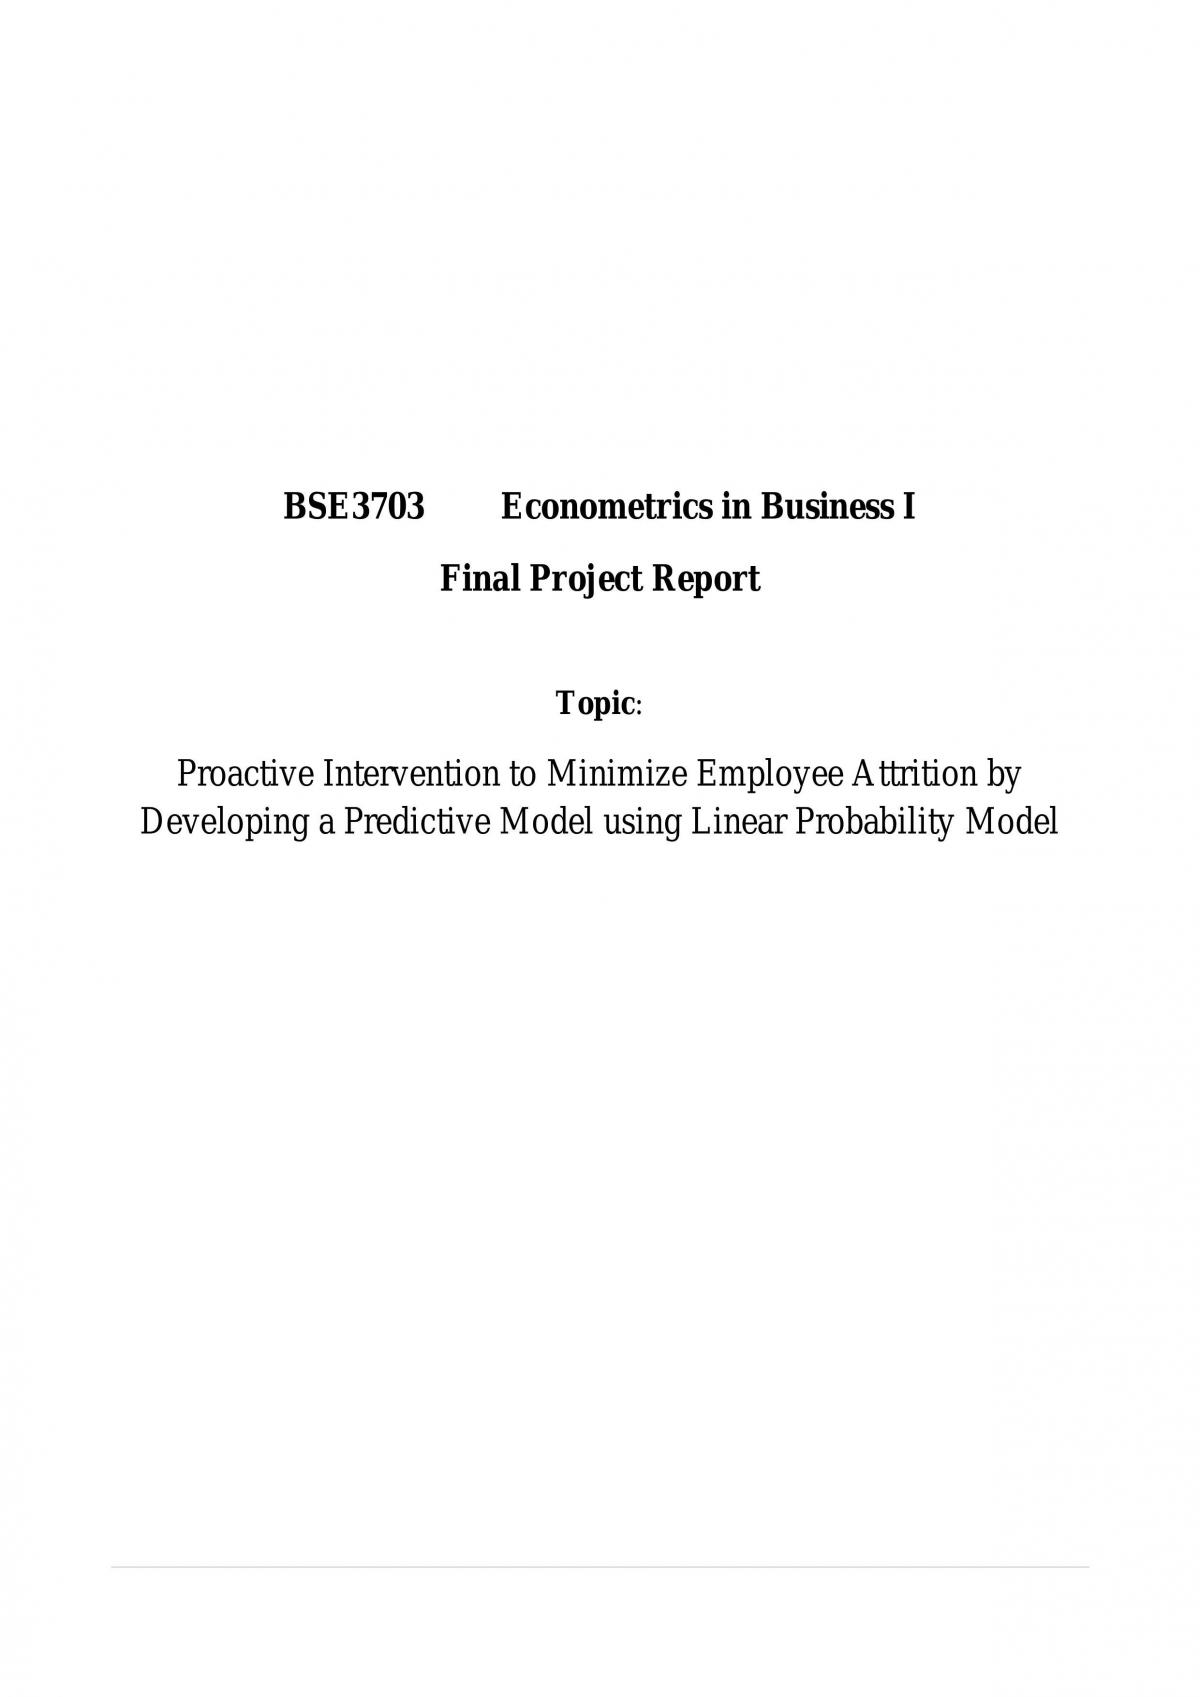 Proactive Intervention to Minimize Employee Attrition by Developing a Predictive Model using Linear Probability Model - Page 1